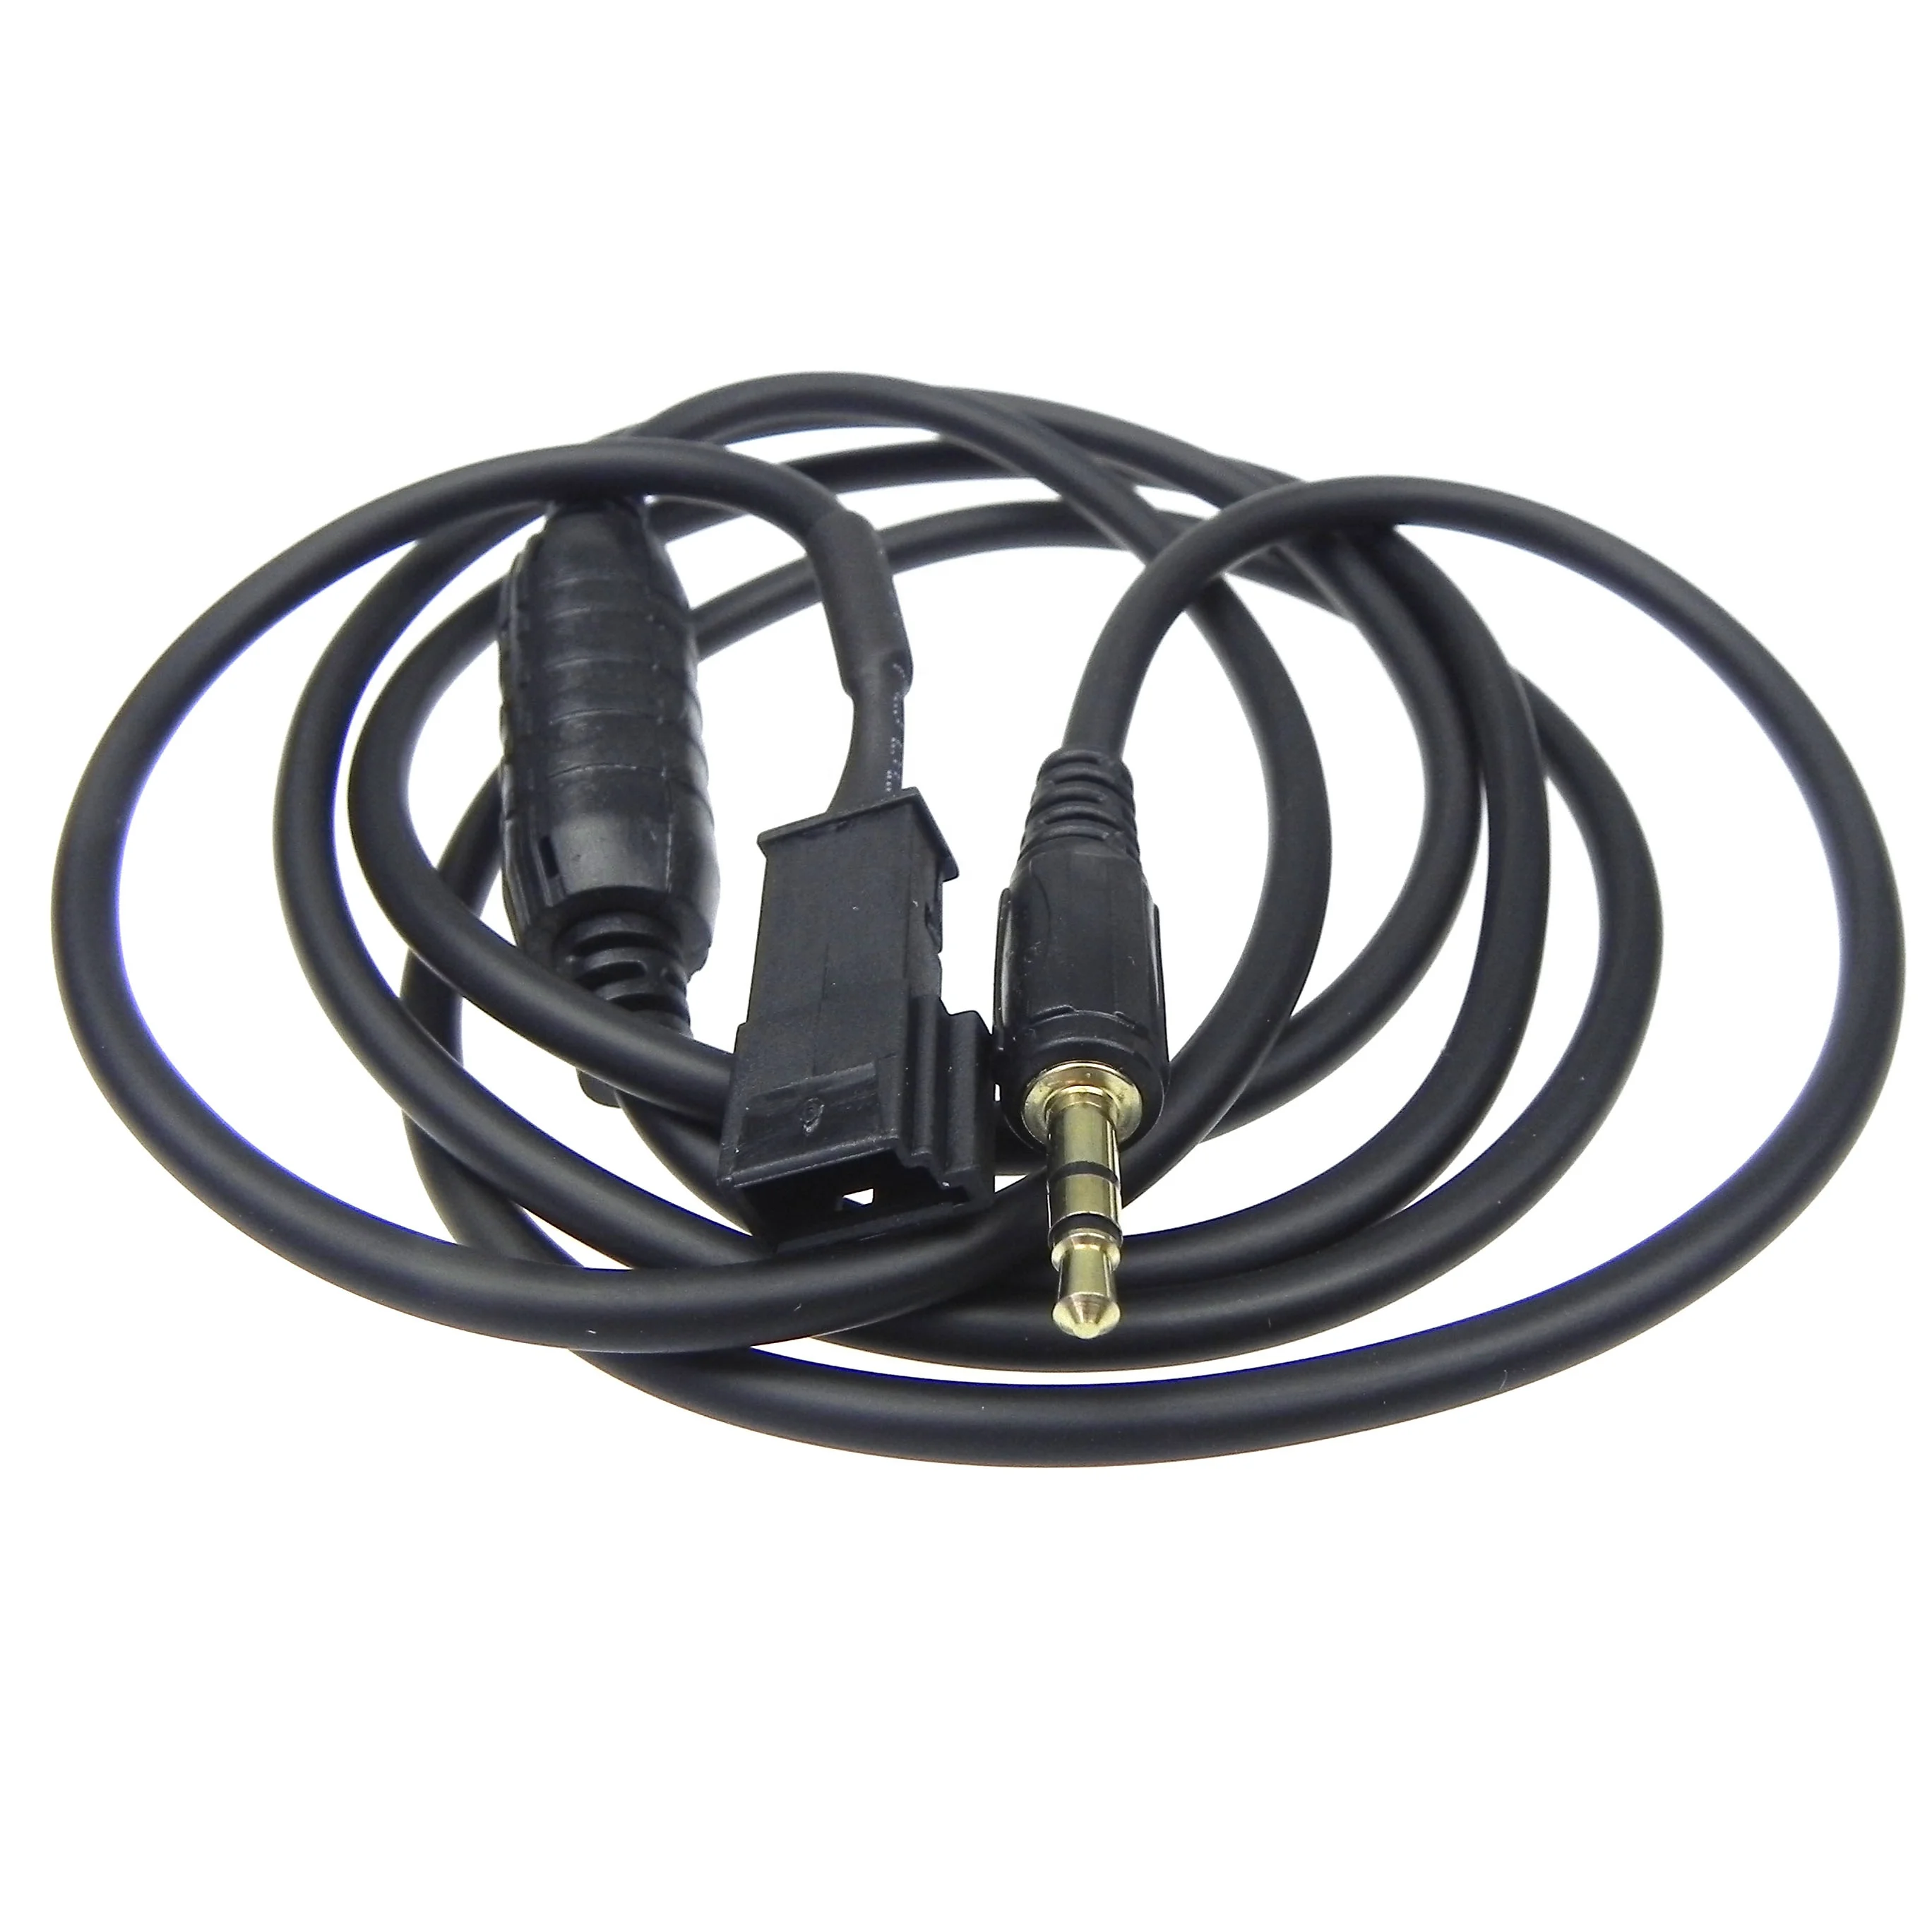 

High quality AUX IN audio connection harness cable for vw BM54 E39 E46 E53 X5 car 16:9 screen